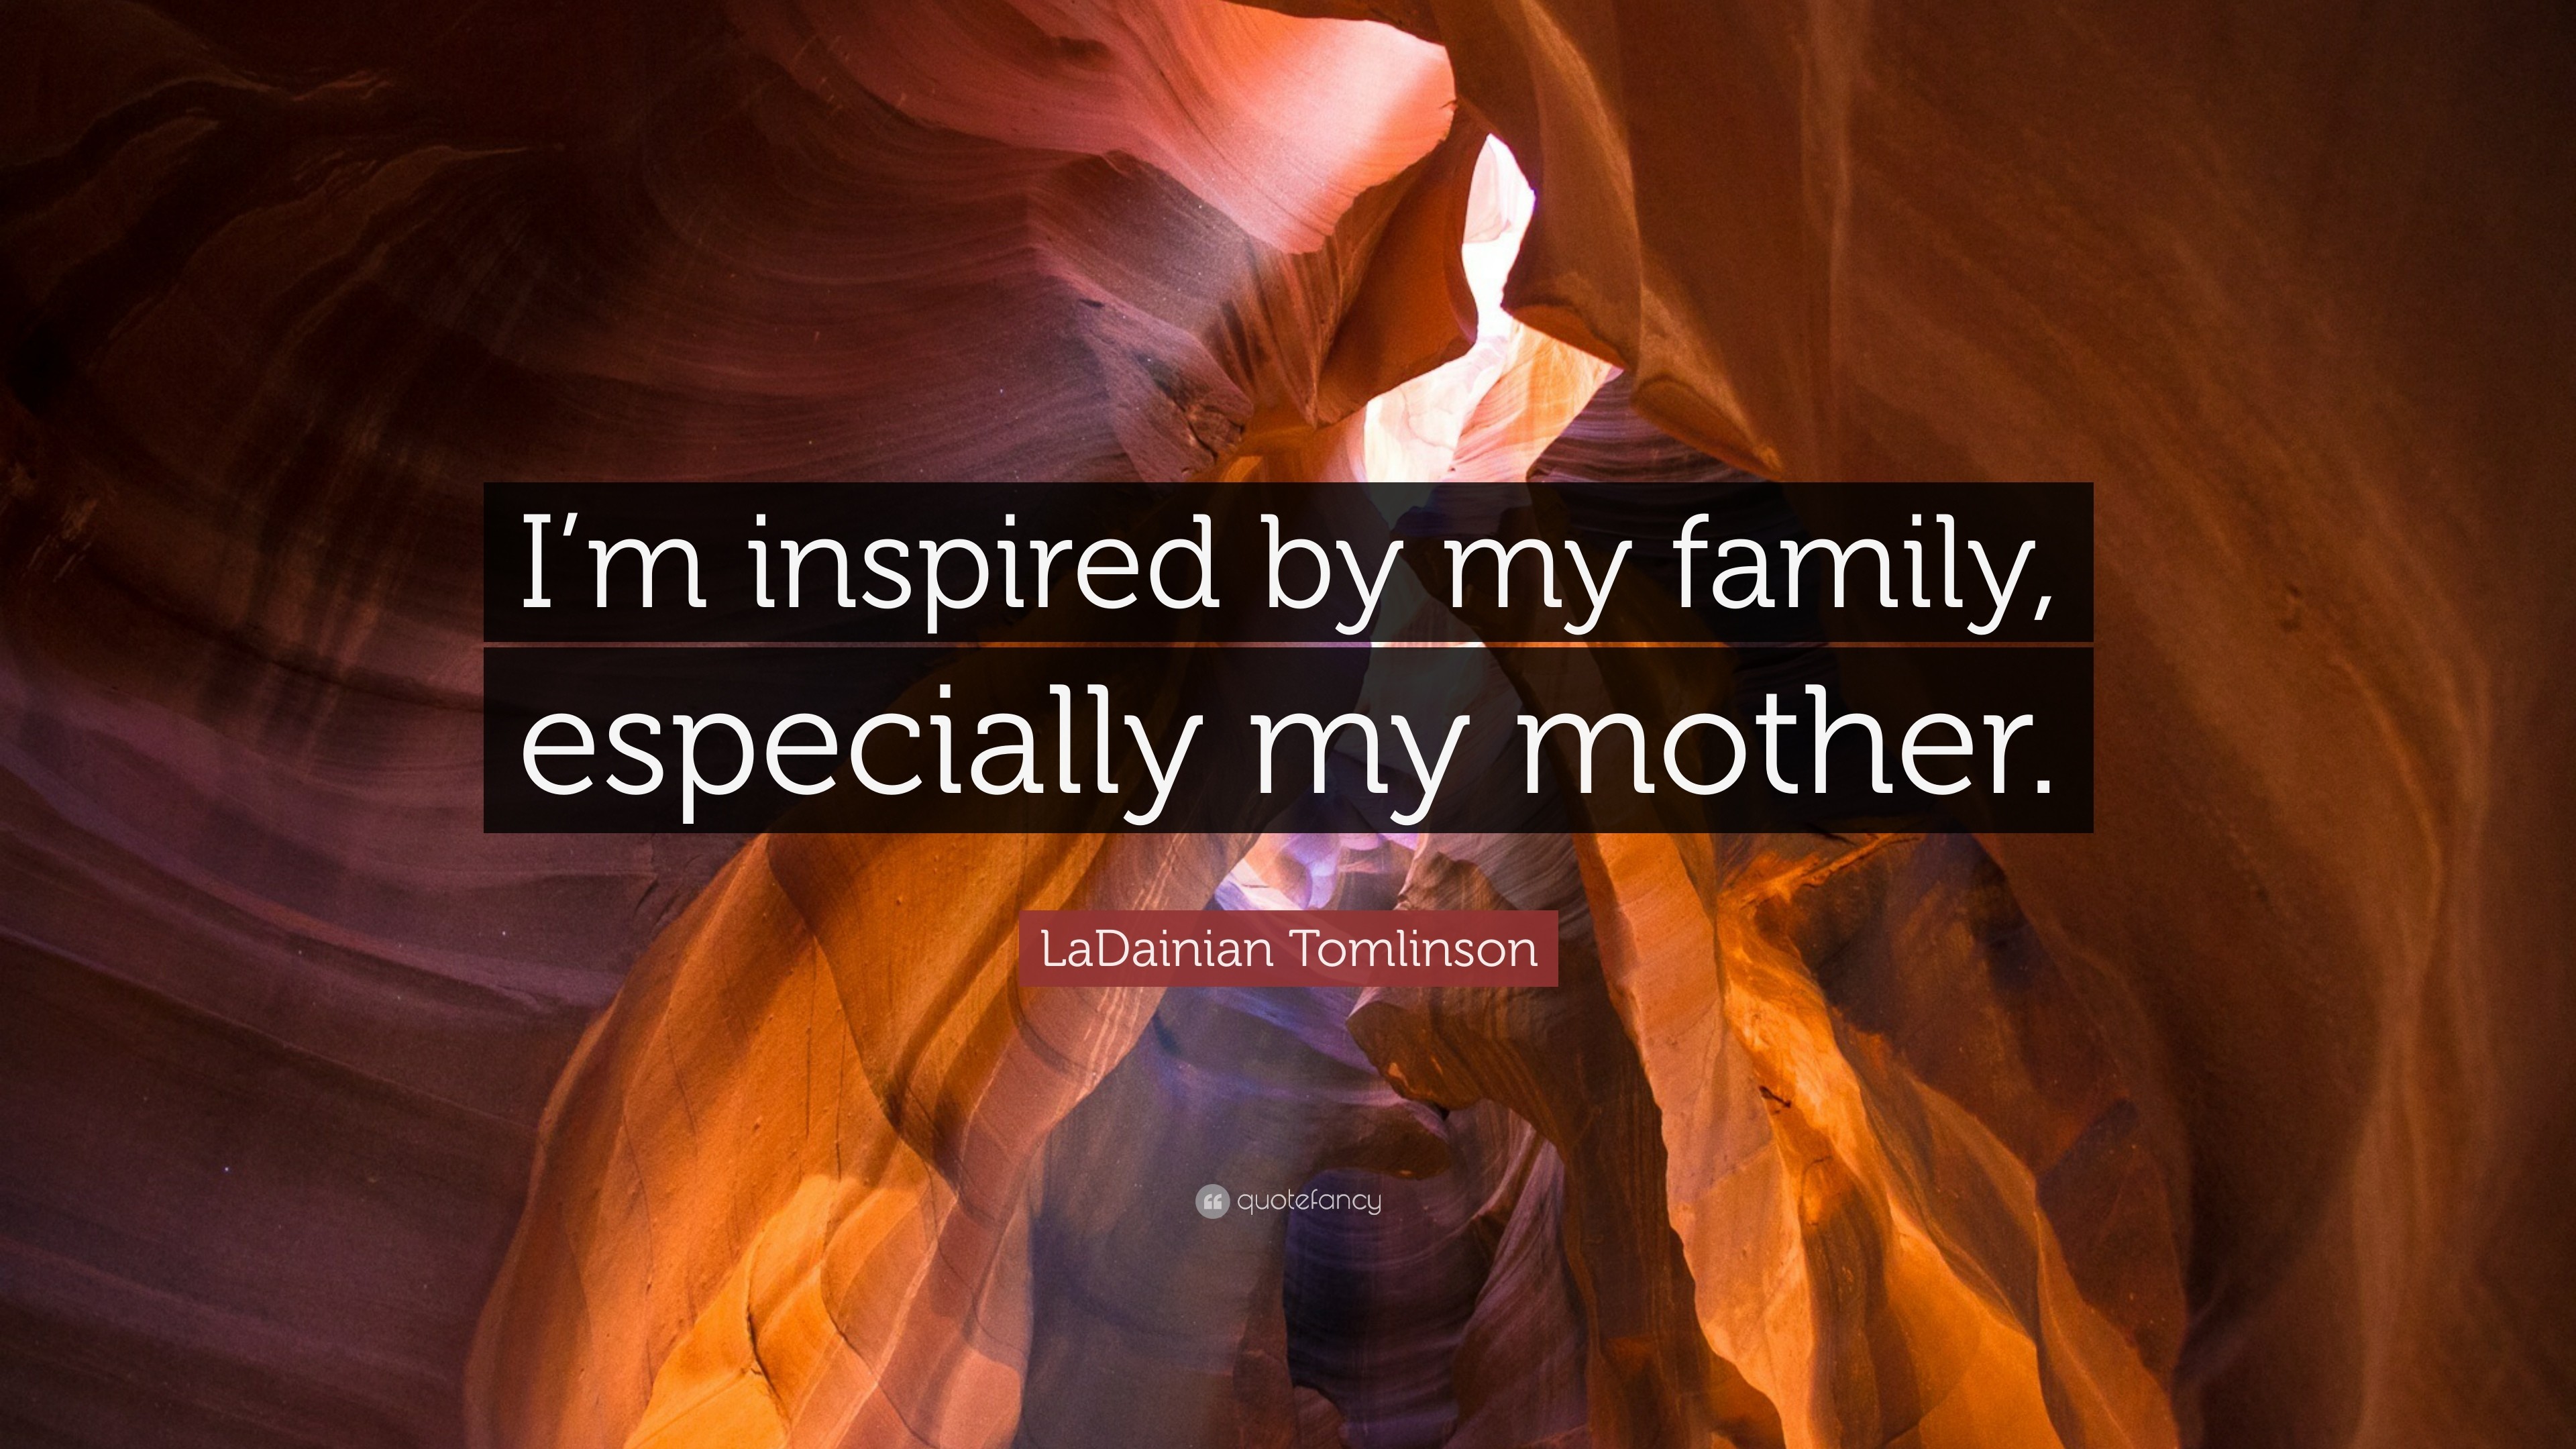 LaDainian Tomlinson Quote Im inspired by my family, especially my mother